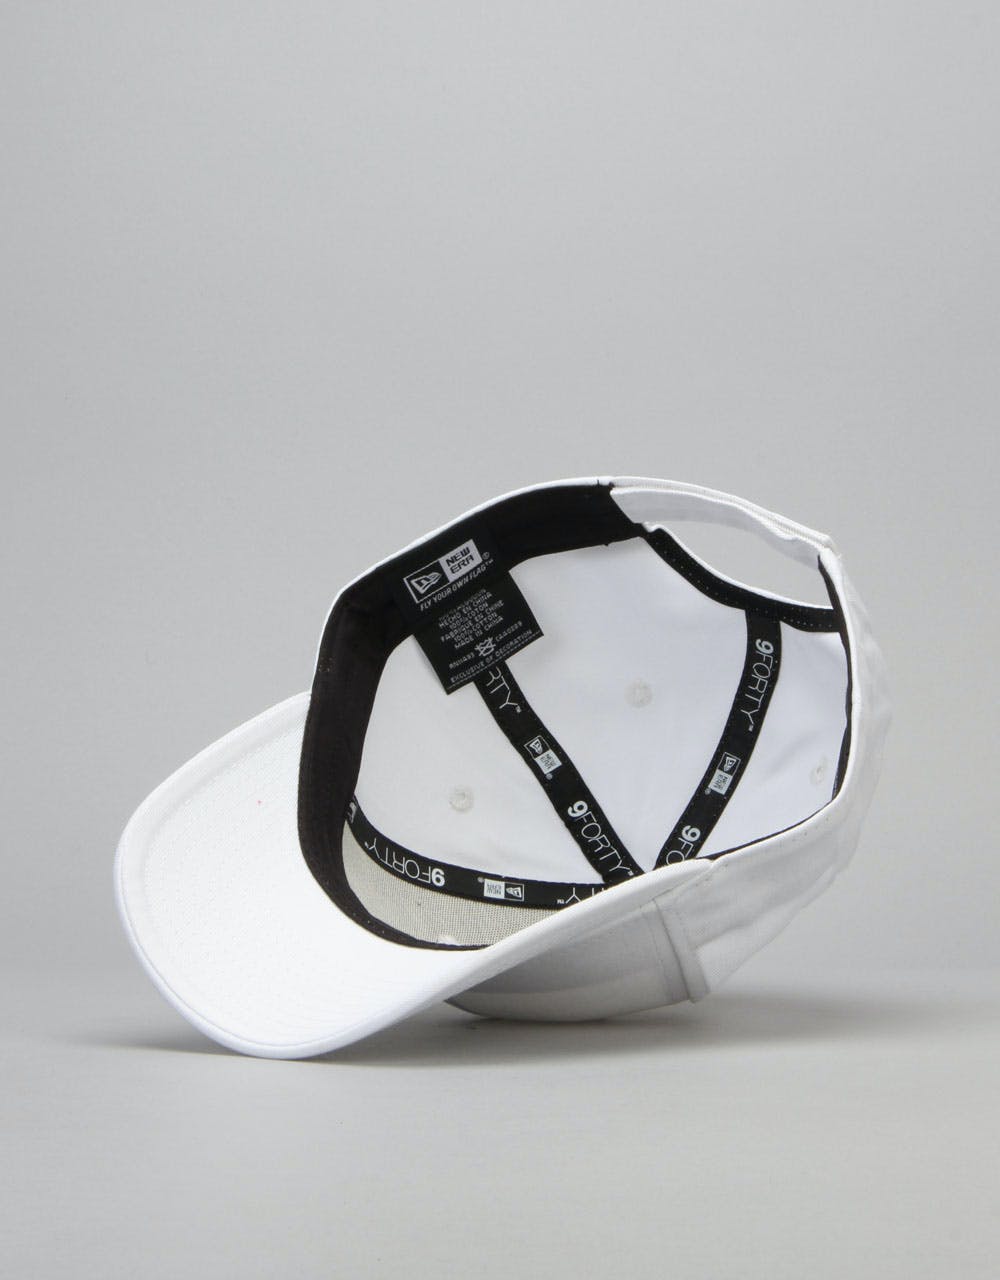 New Era 9Forty Flag Collection Cap - White/Black